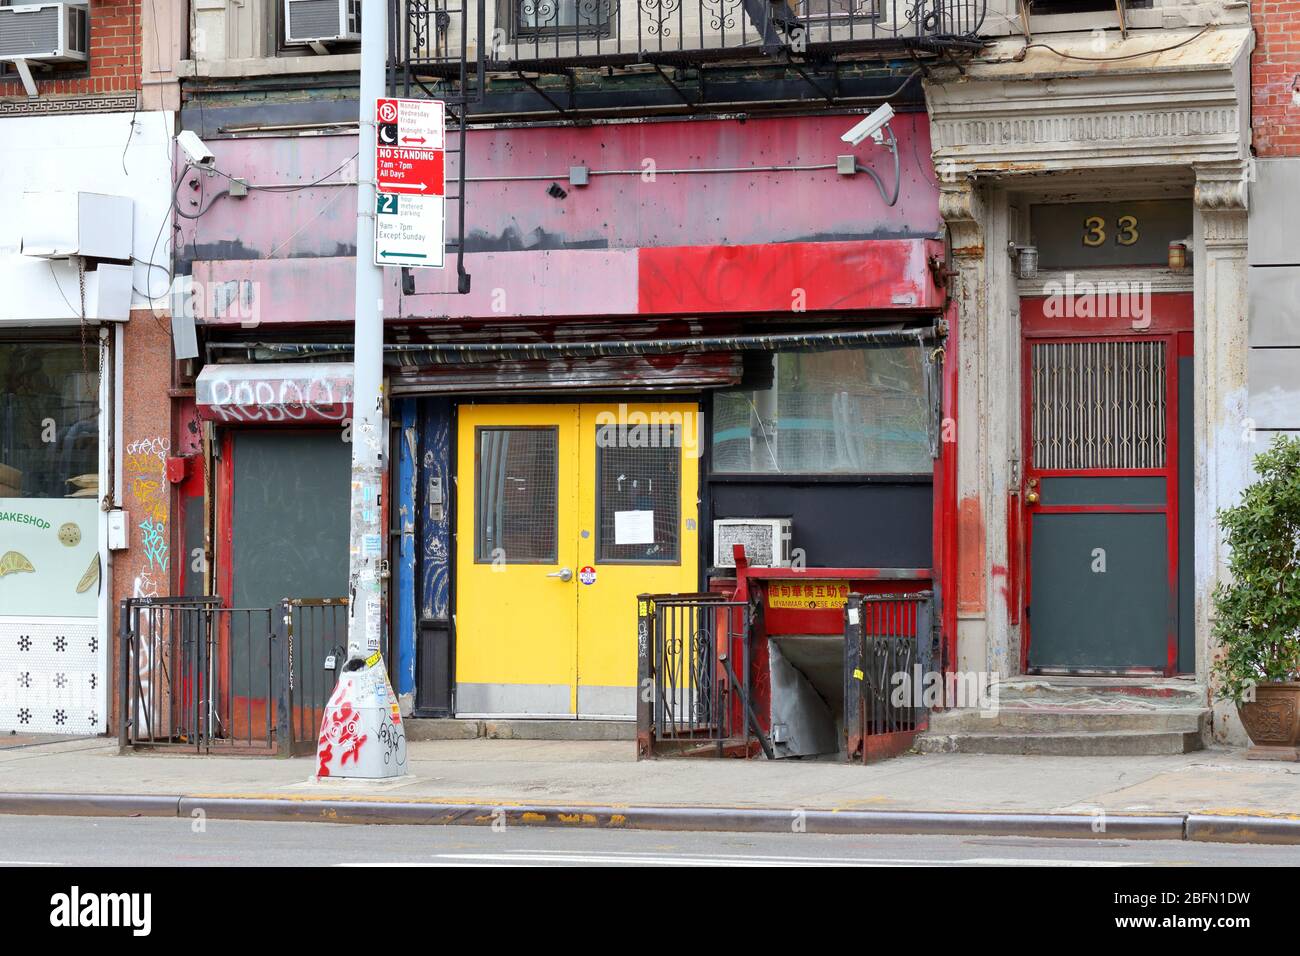 Safe Horizon - Streetwork Drop-In Center, 33 Essex St, New York, NY. exterior storefront of a homeless youth safehouse in the Lower East Side. Stock Photo